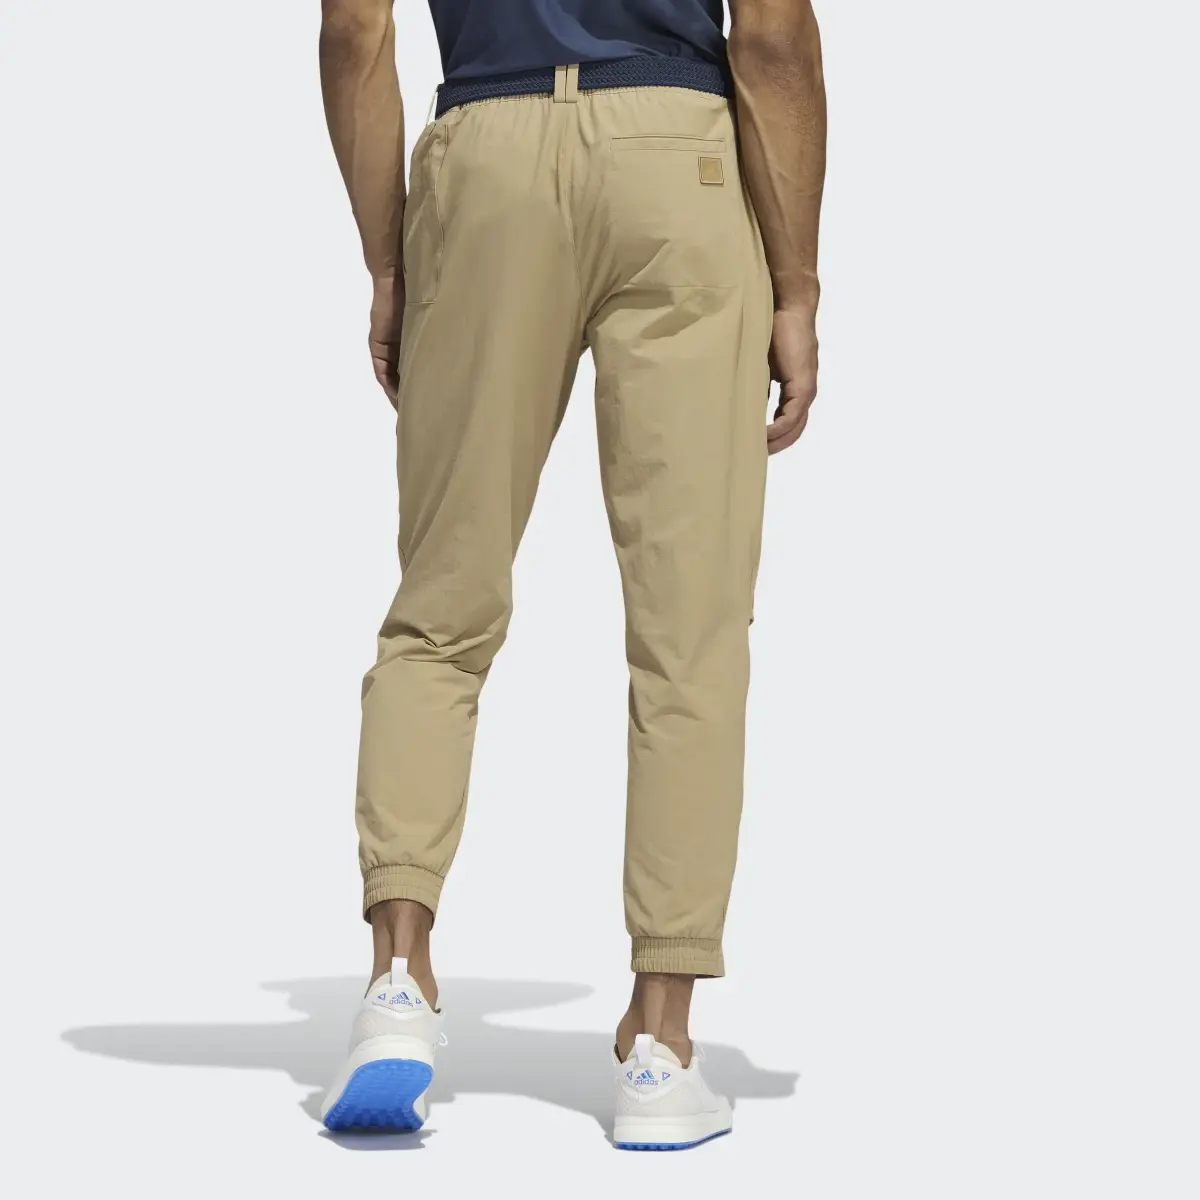 Adidas Go-To Commuter Pants. 2